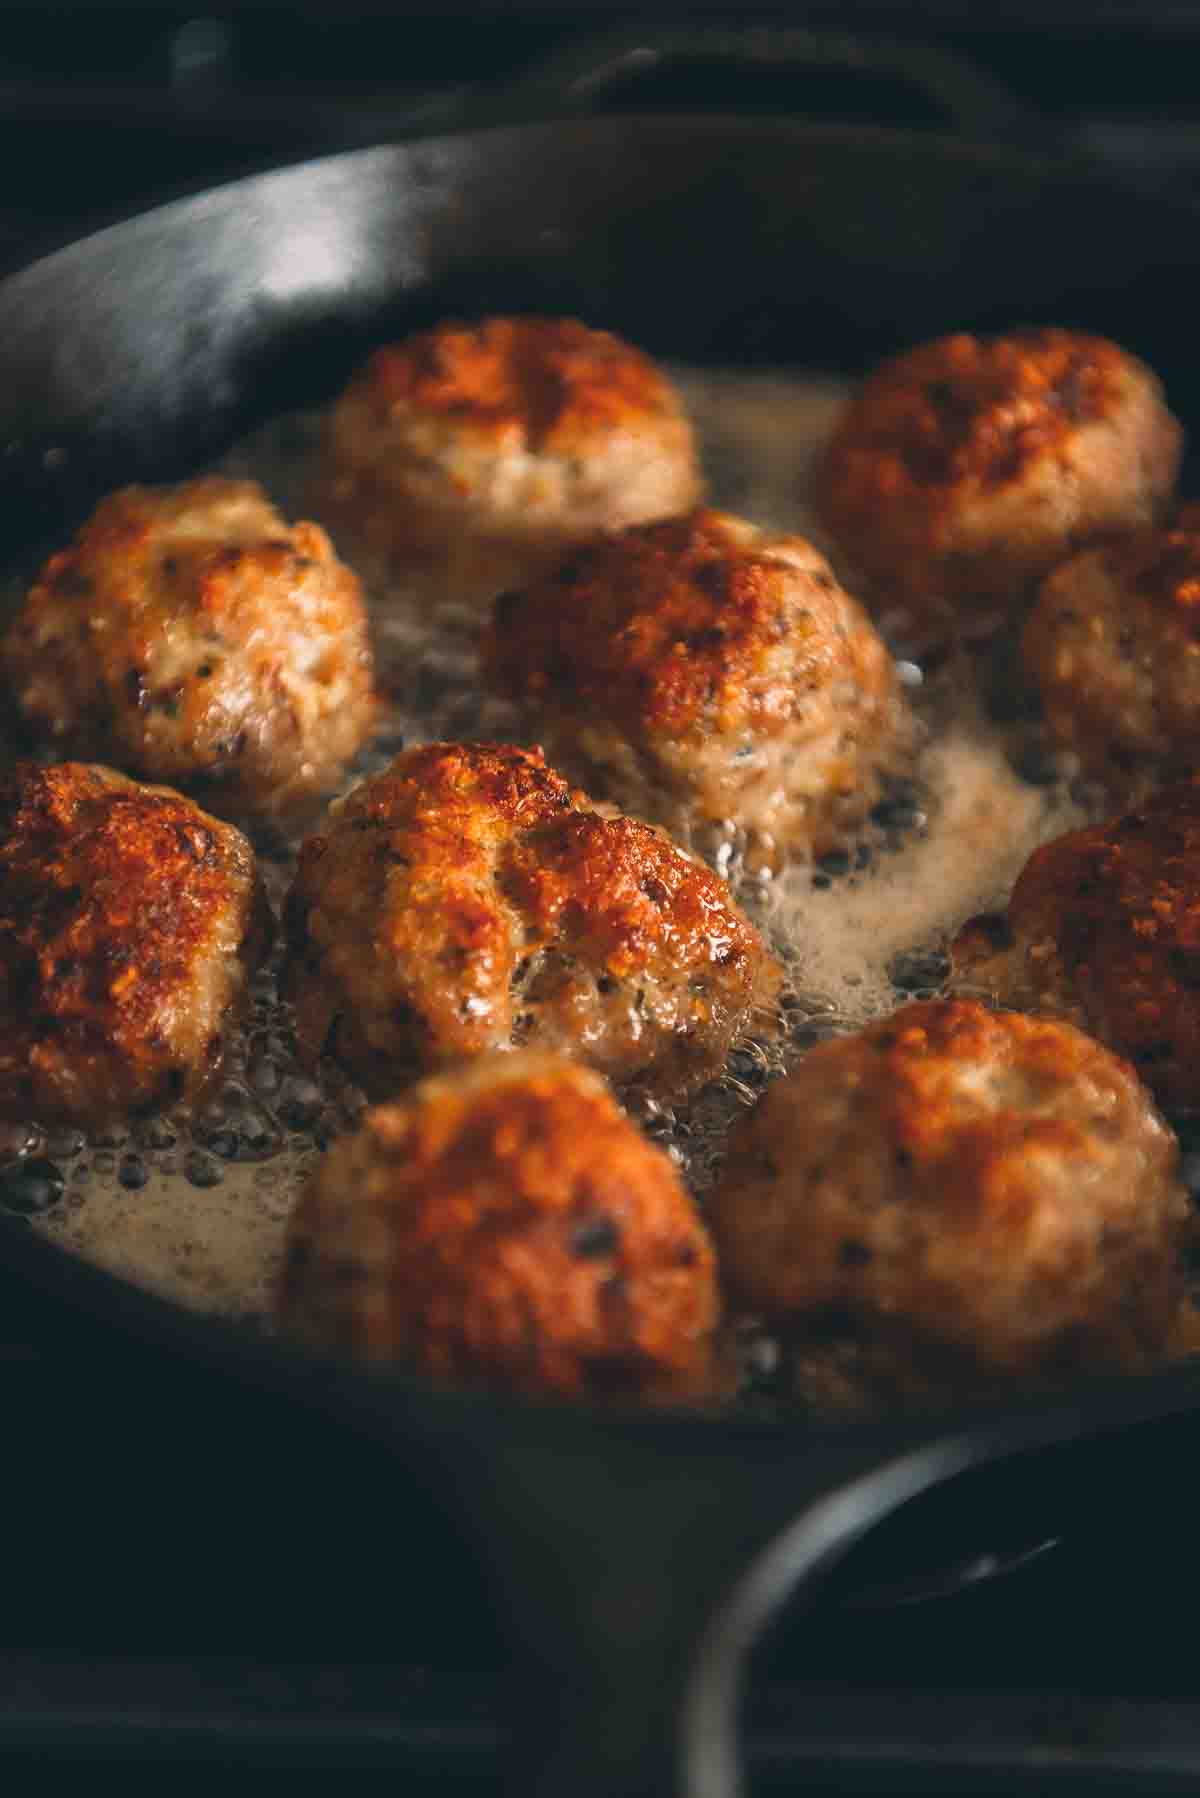 Close up of golden brown crust on top of fried meatball. 